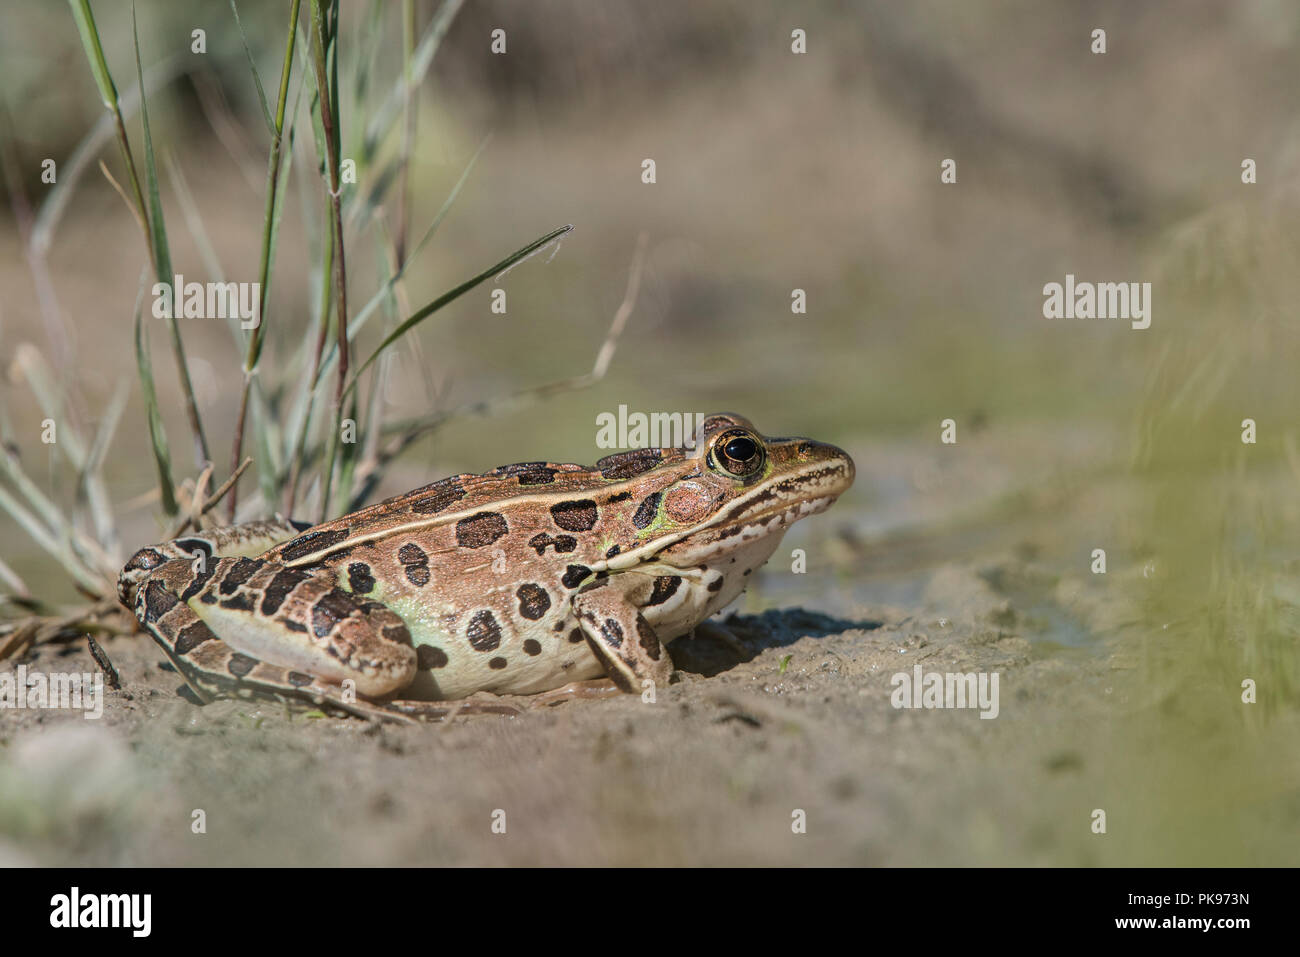 A Northern leopard frog (Lithobates pipiens) sitting in a muddy puddle of Horicon marsh, Wisconsin. Stock Photo